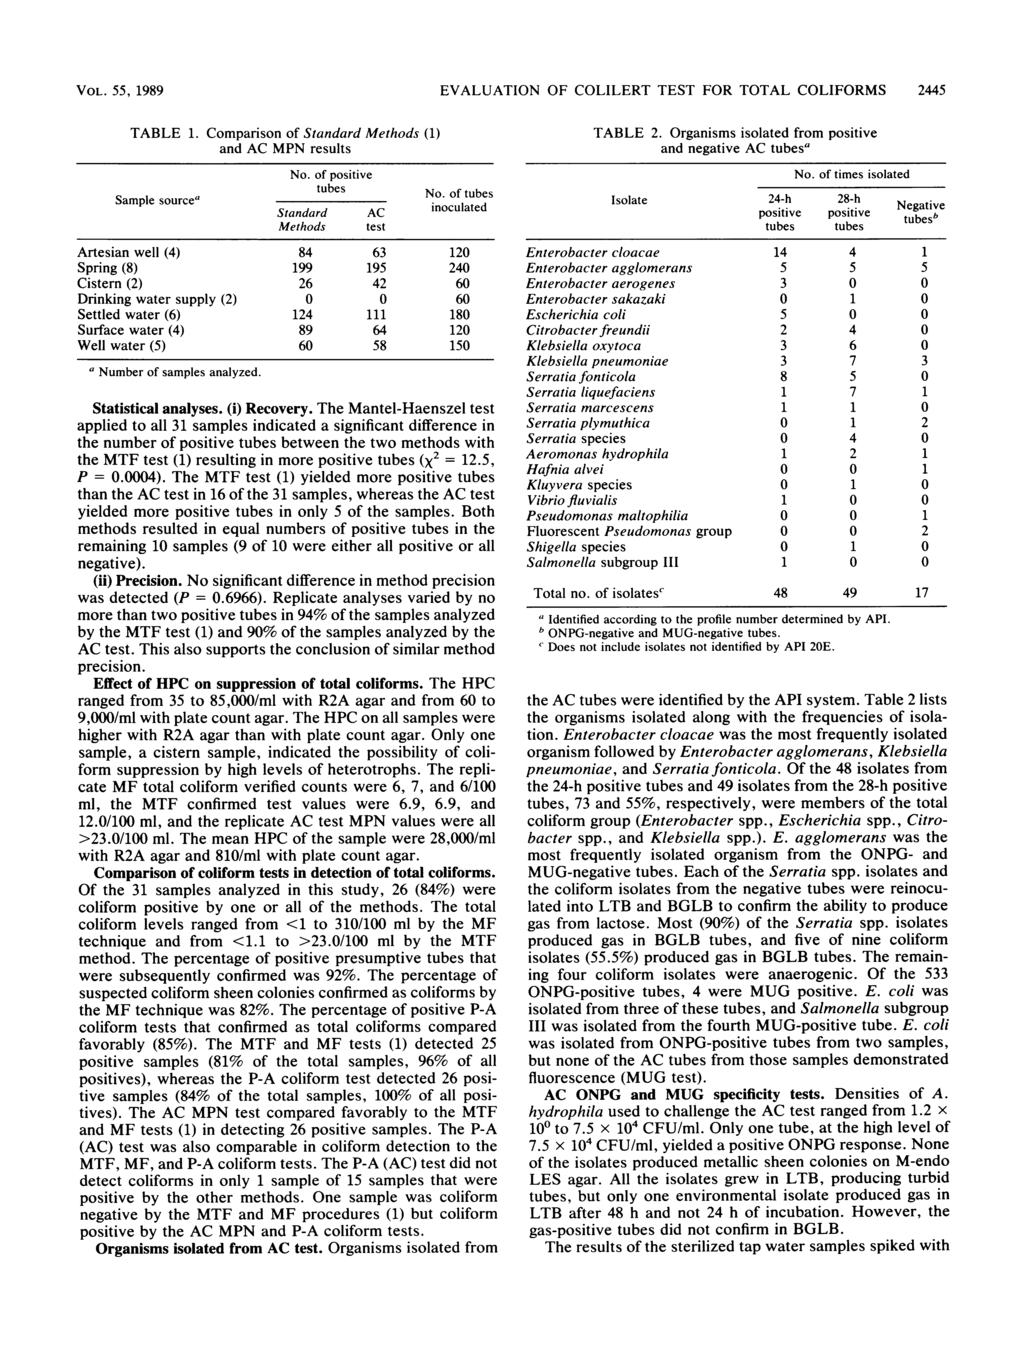 VOL. 55, 1989 EVALUATION OF COLILERT TEST FOR TOTAL COLIFORMS 2445 TABLE 1. Comparison of Standard Methods (1) and AC MPN results Sample source Sample sourcea No. of positive tubes No.